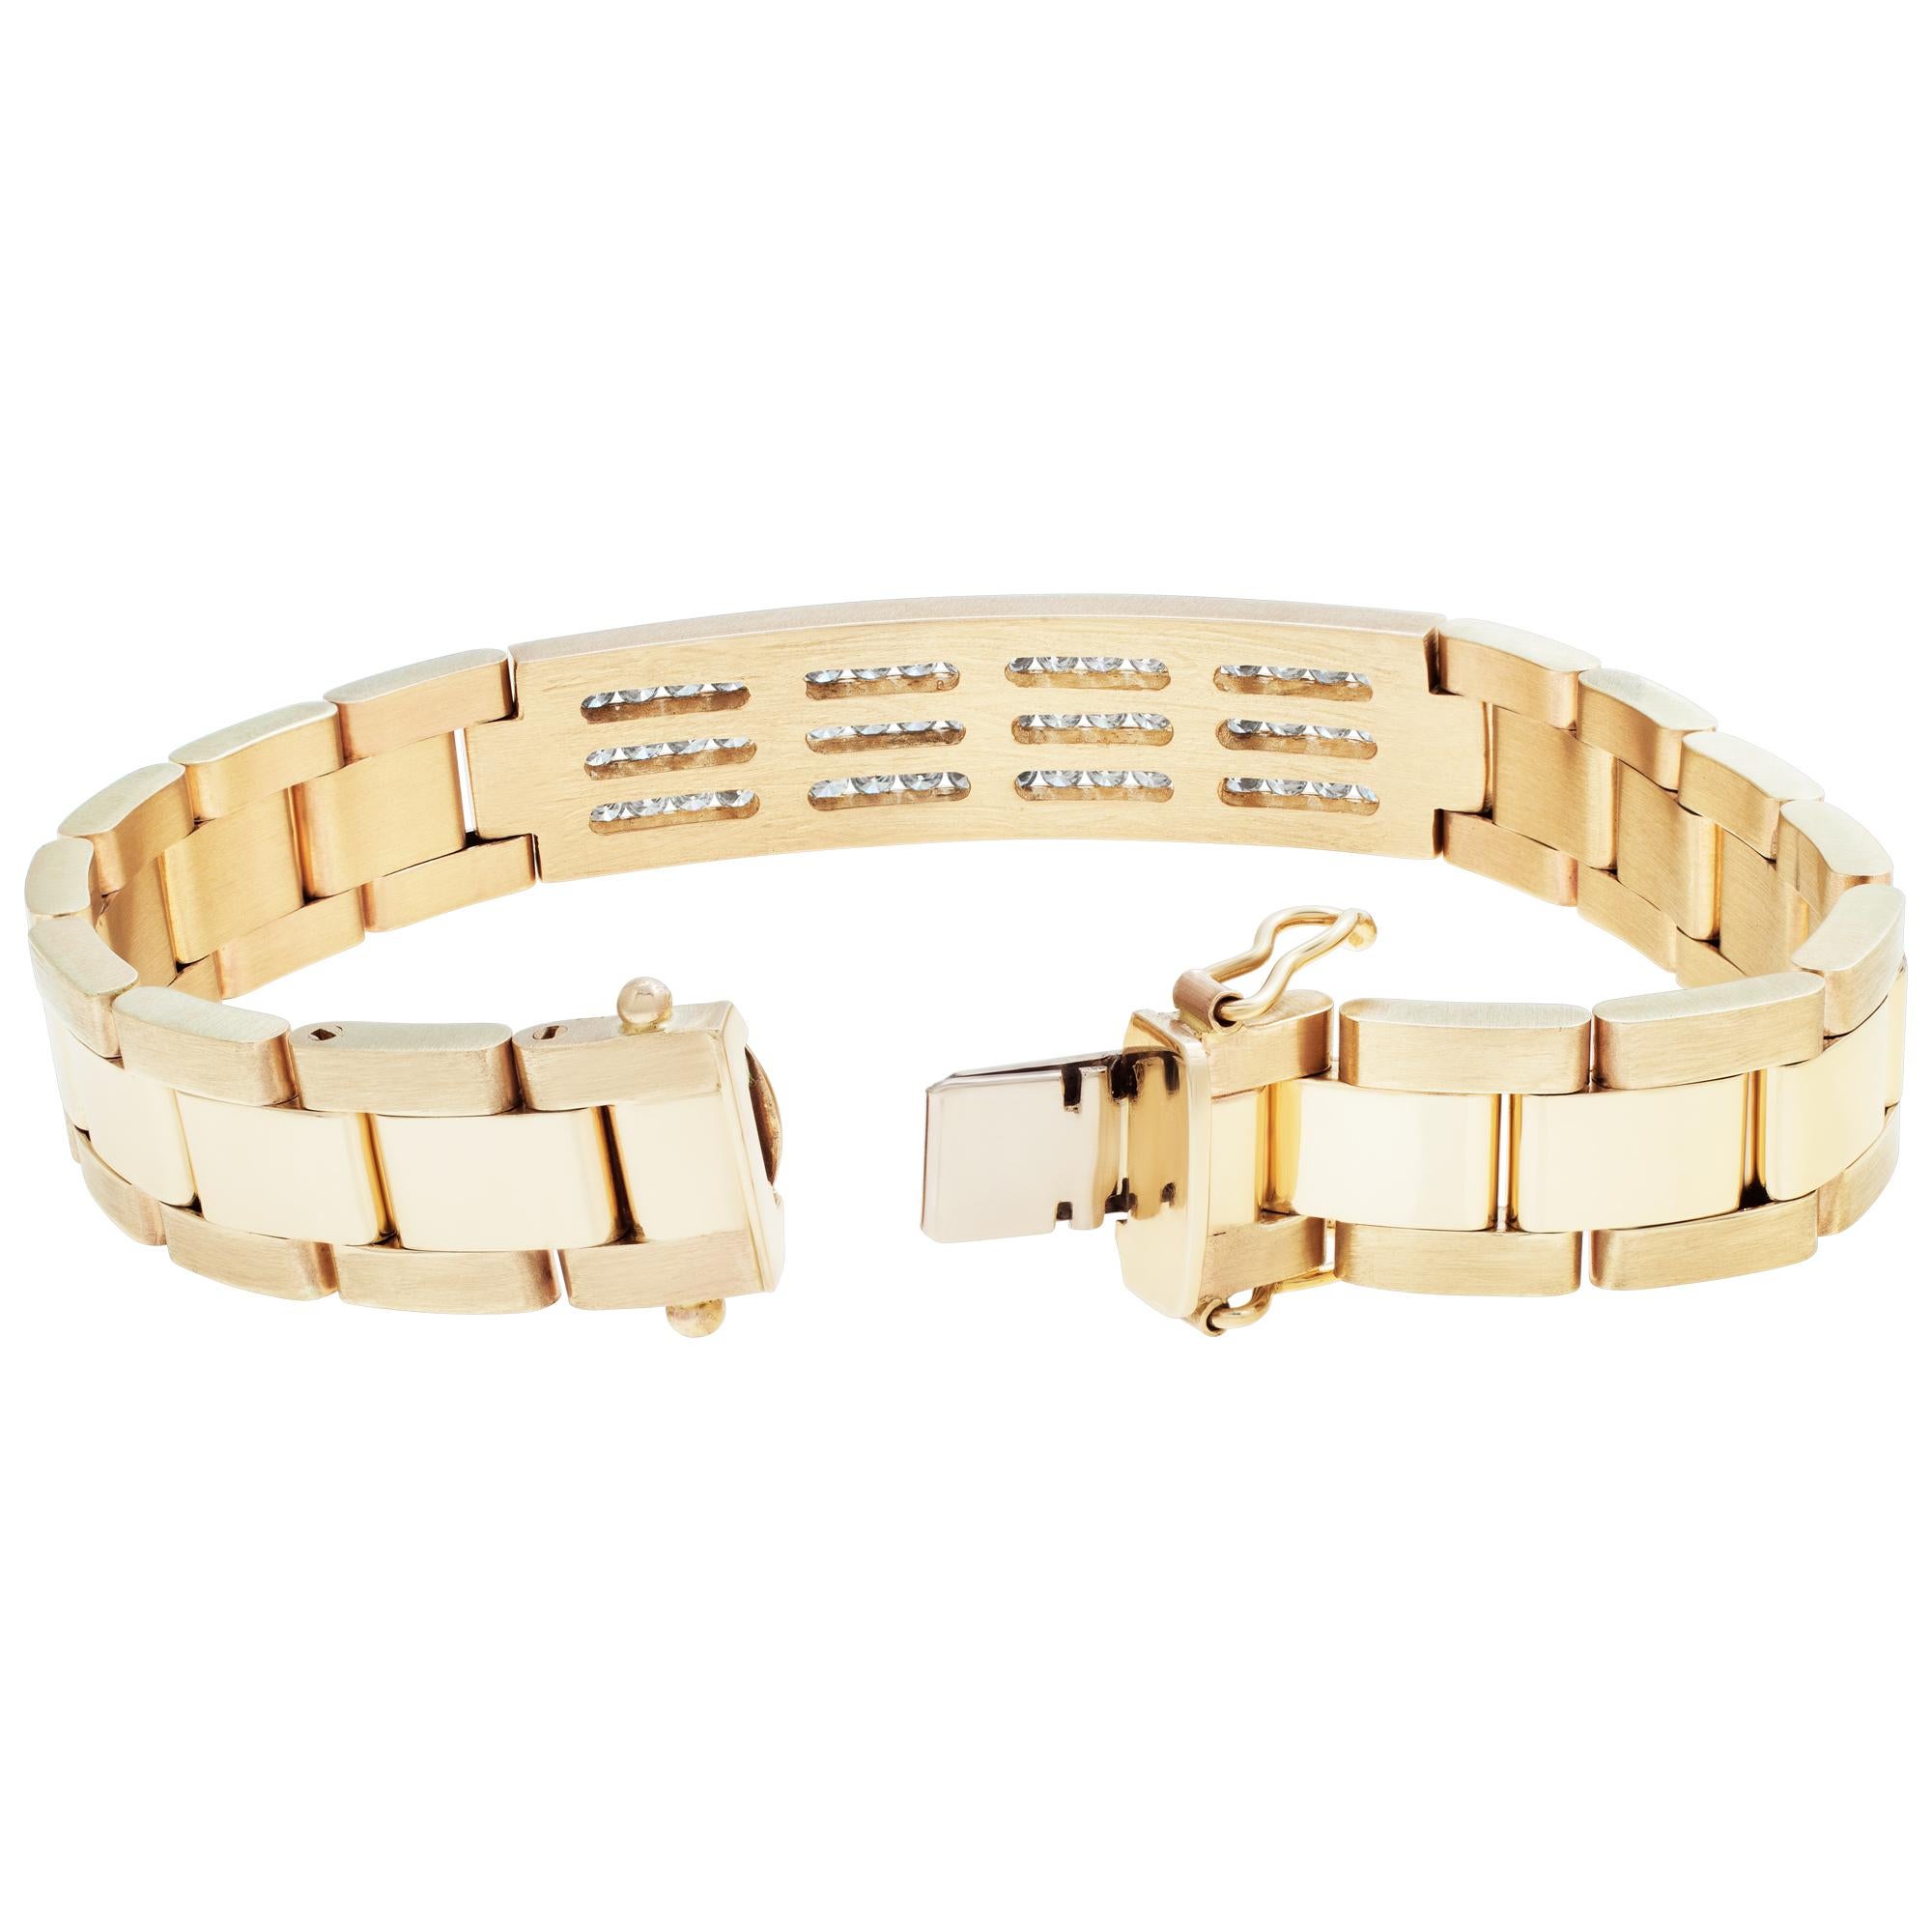 Mens yellow gold link bracelet with diamonds. In Excellent Condition For Sale In Surfside, FL